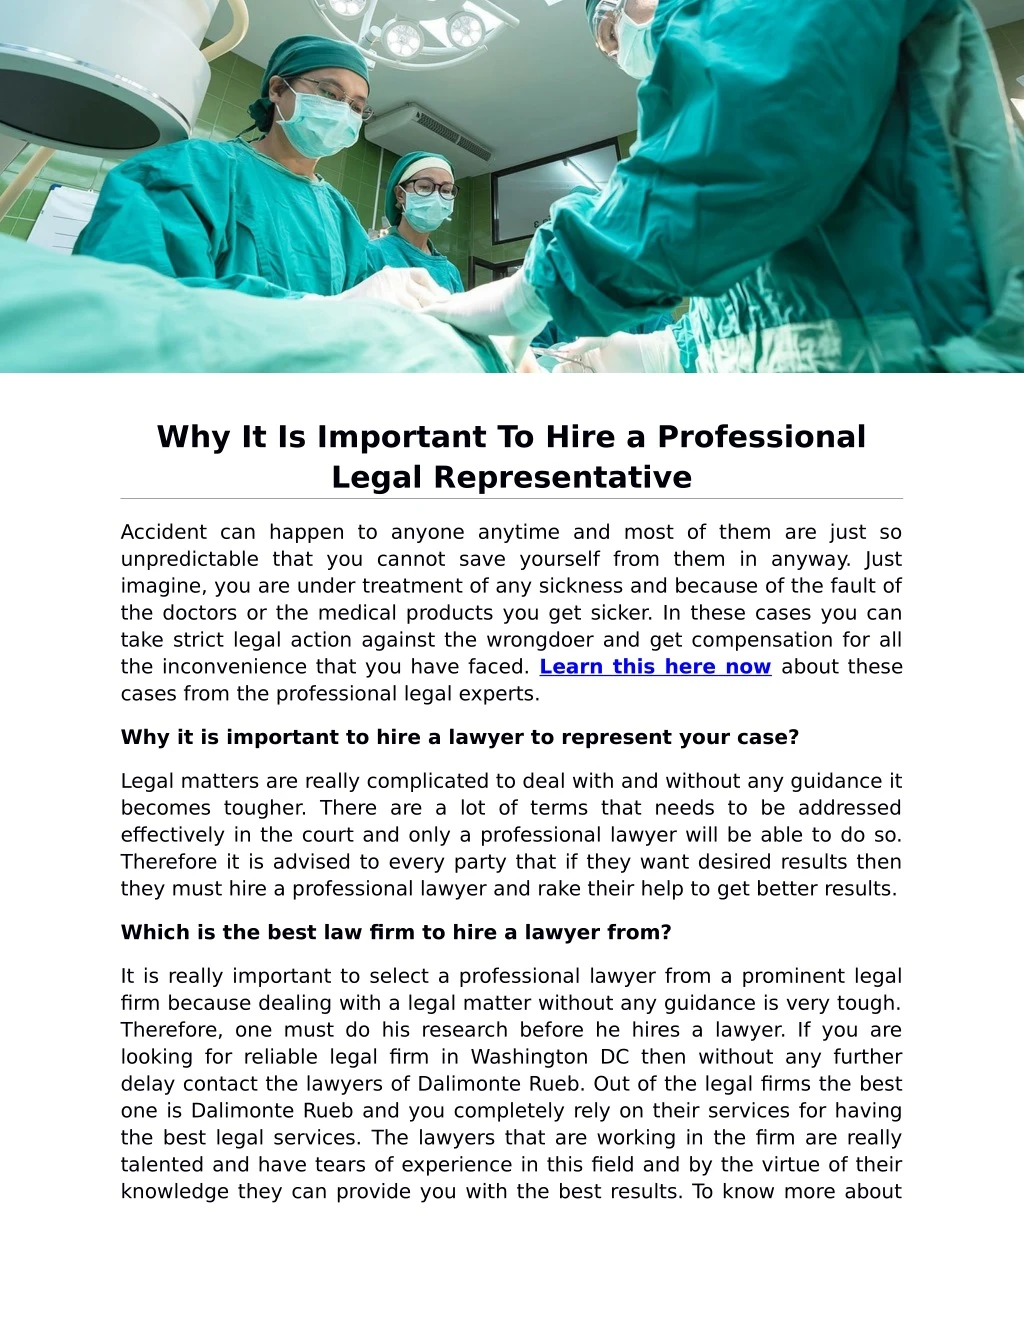 why it is important to hire a professional legal